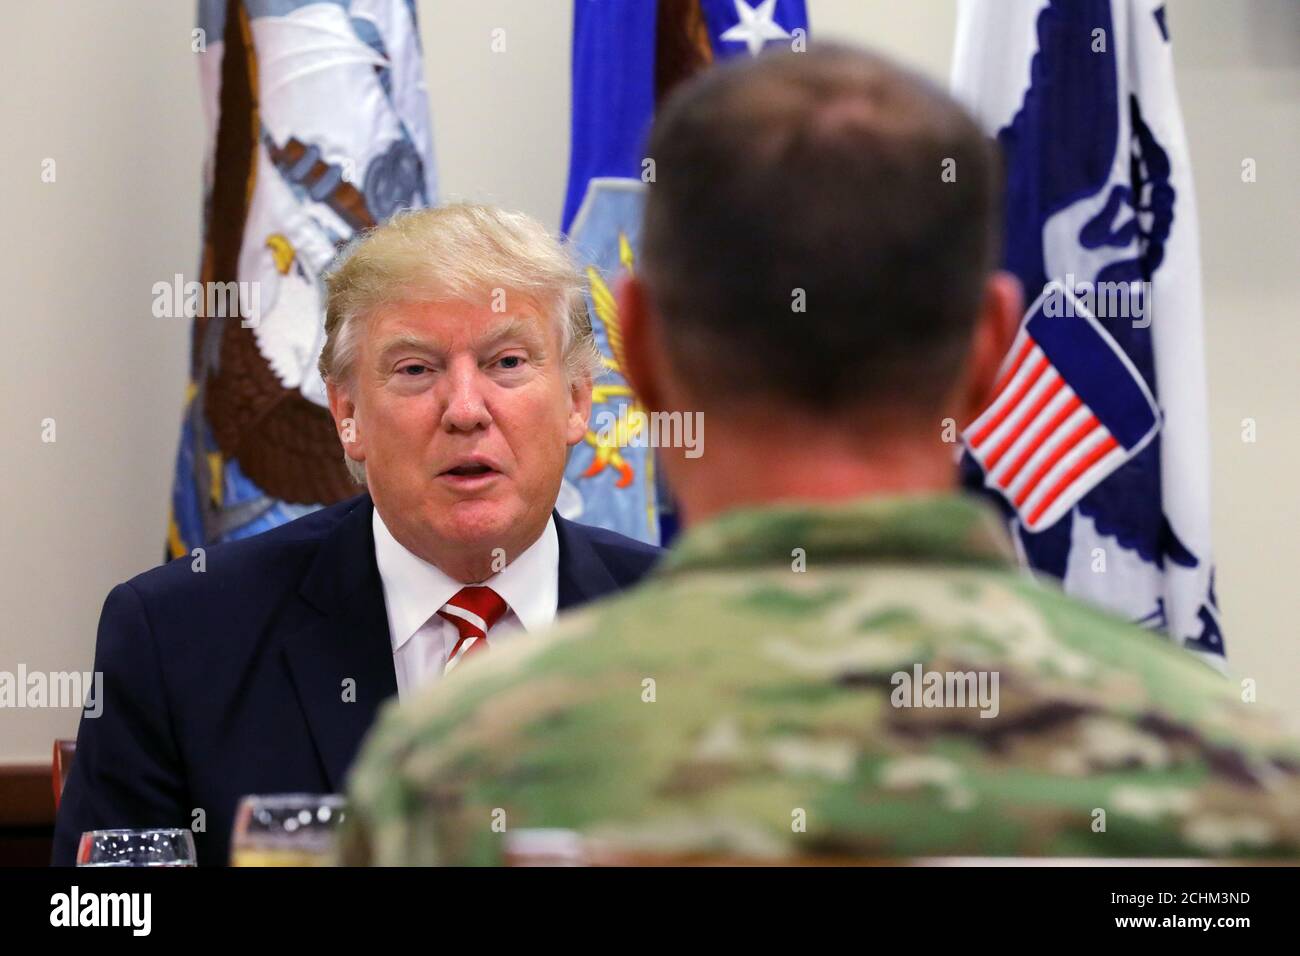 U.S. President Donald Trump attends a lunch with members of the U.S. military during a visit at the U.S. Central Command (CENTCOM) and Special Operations Command (SOCOM) headquarters in Tampa, Florida, U.S., February 6, 2017. REUTERS/Carlos Barria Stock Photo